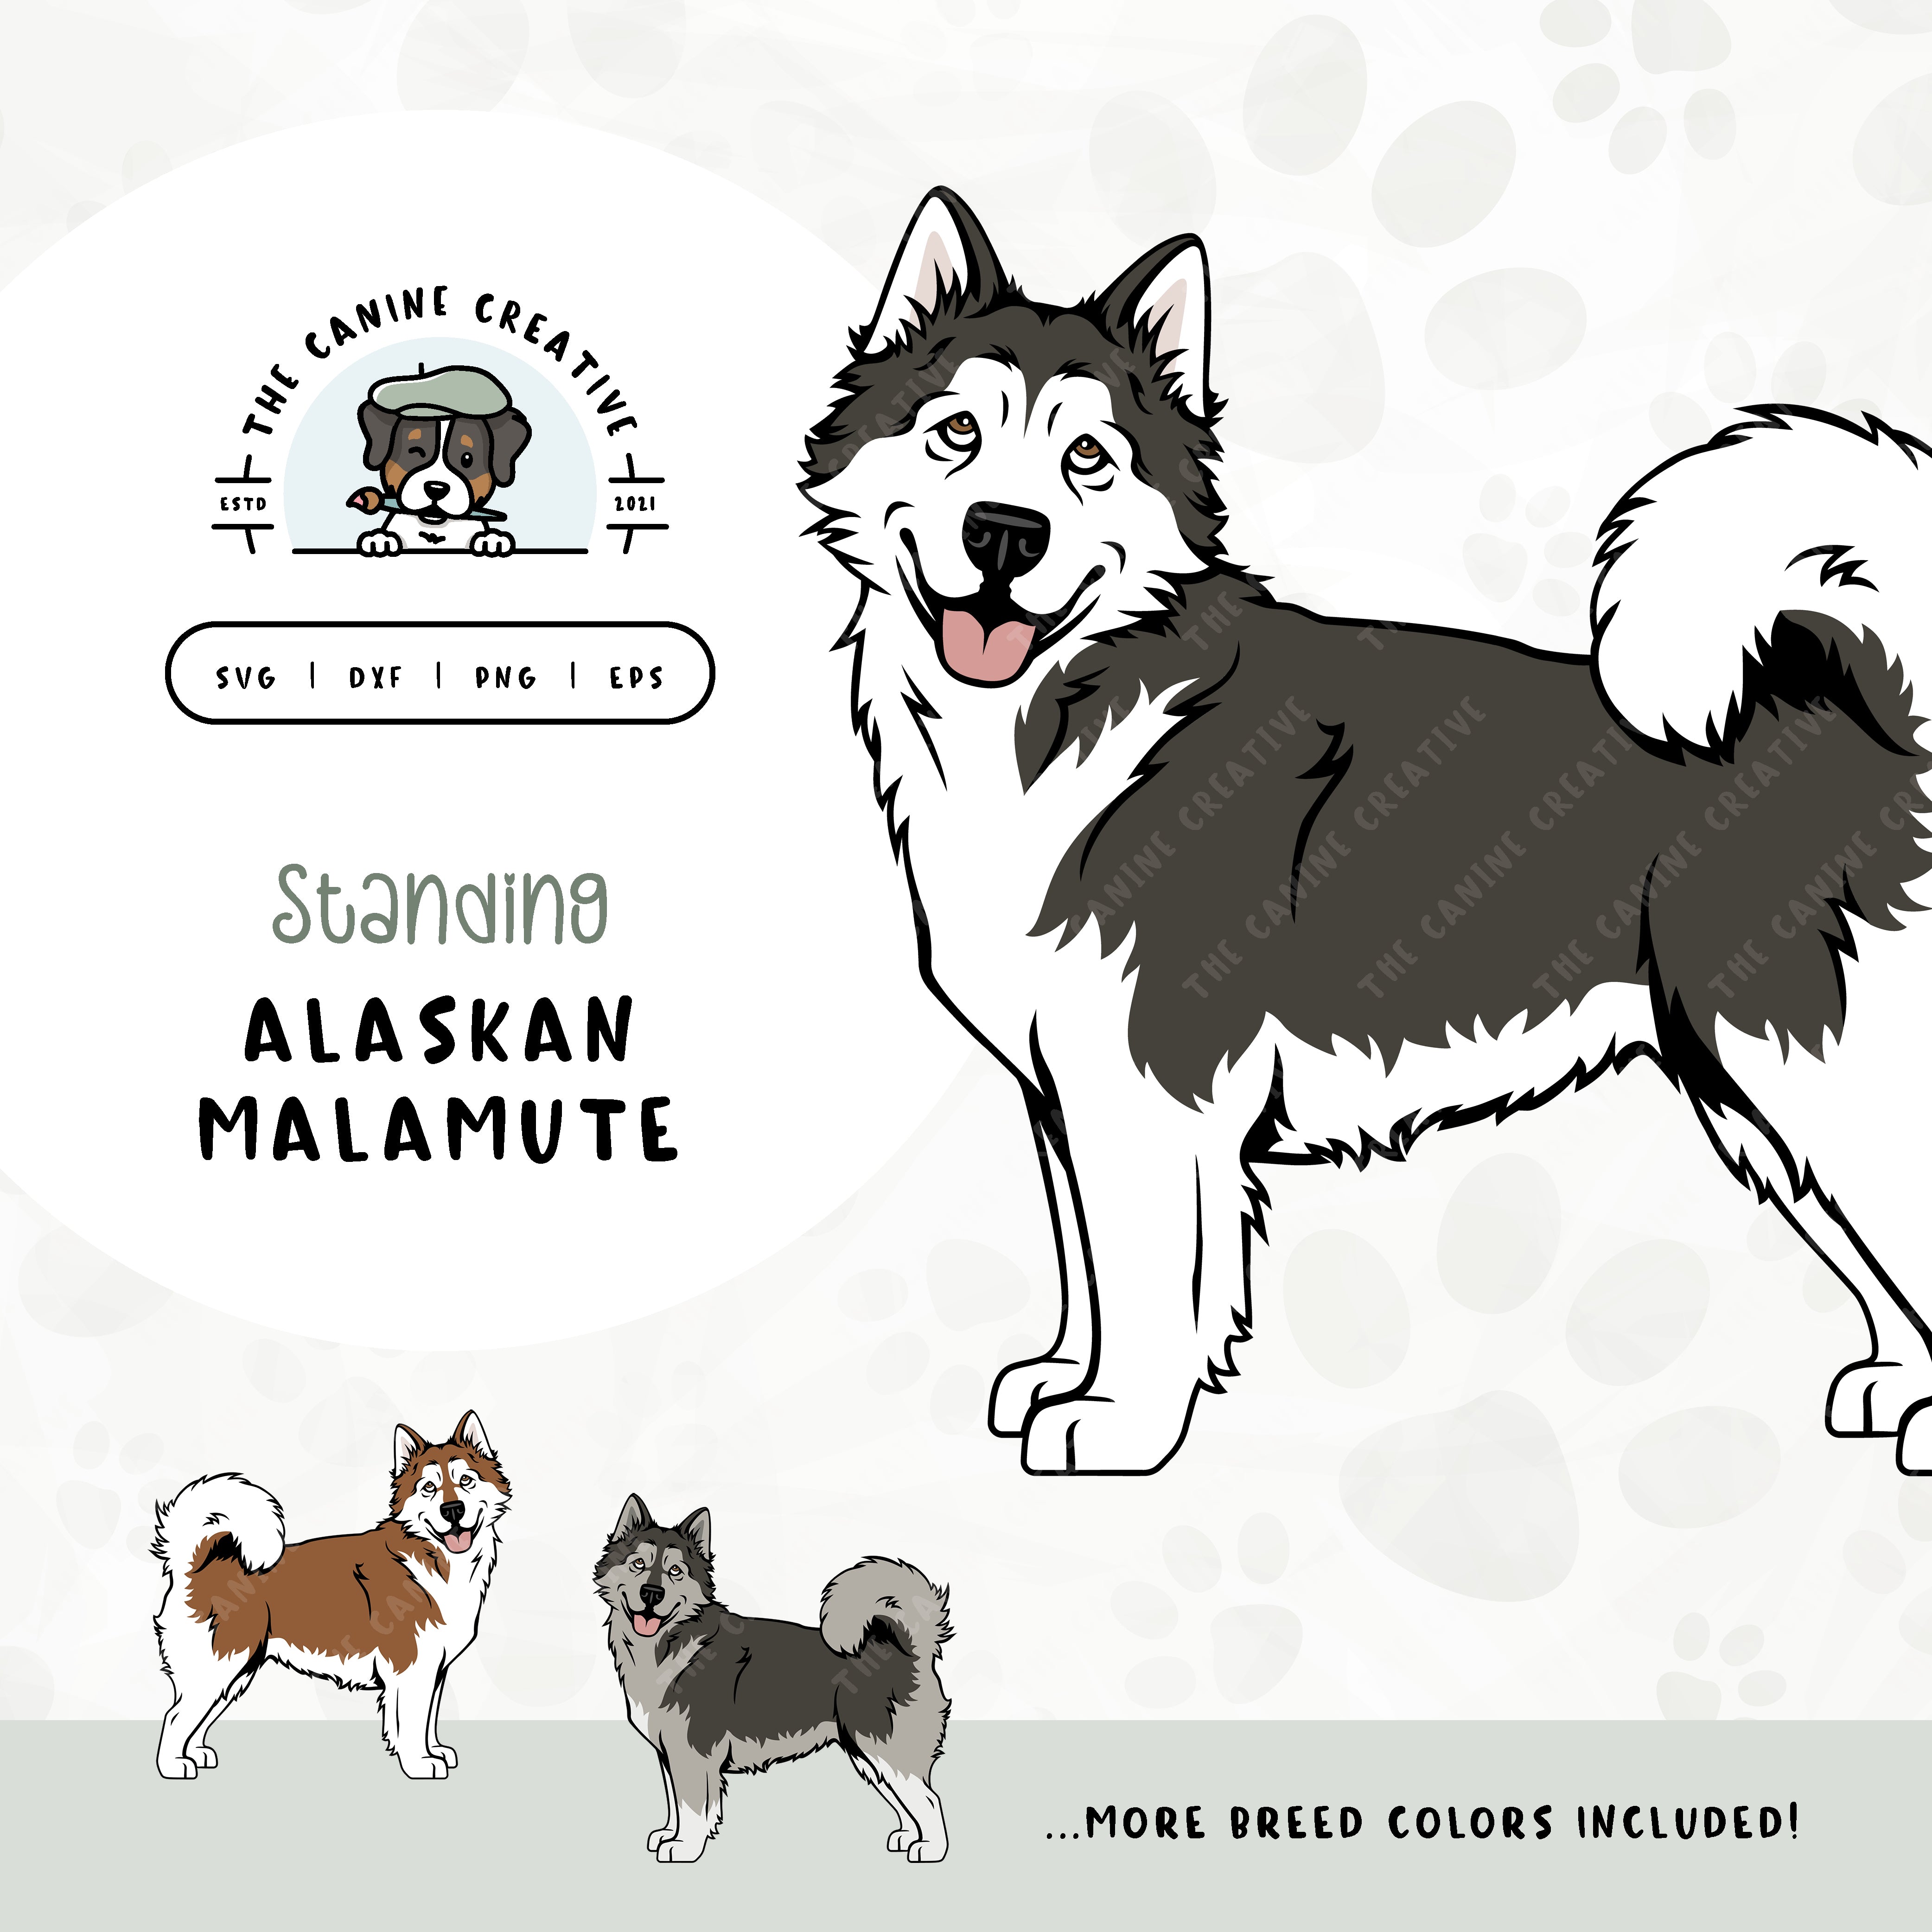 This standing dog design features an Alaskan Malamute. File formats include: SVG, DXF, PNG, and EPS.